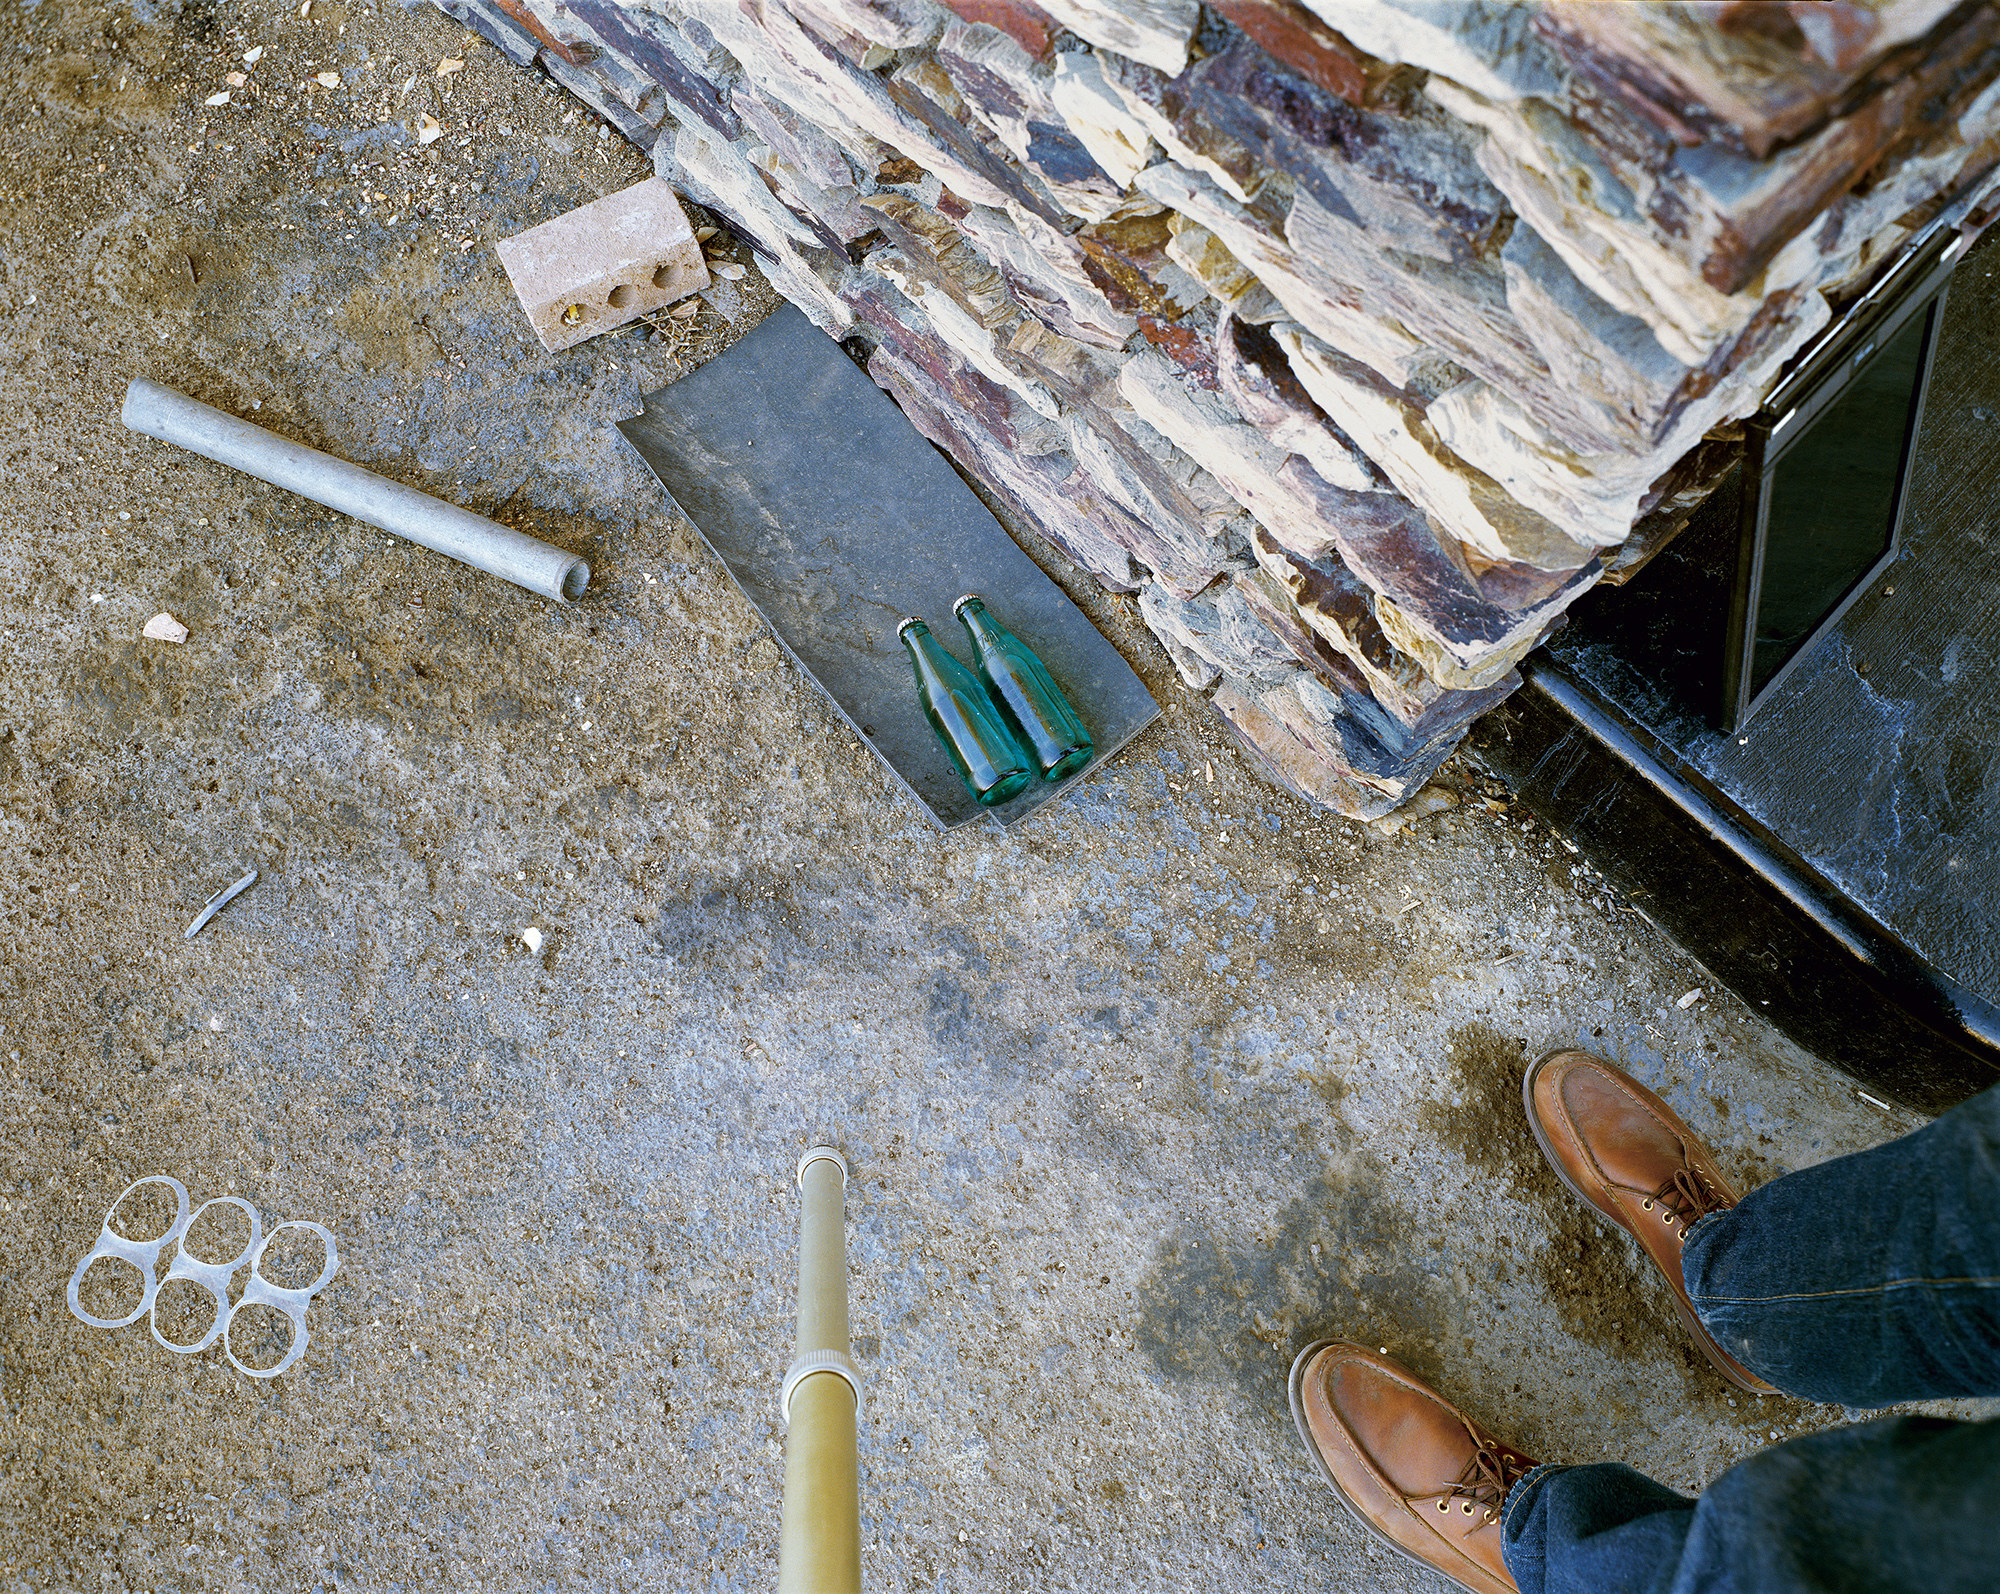 Various objects on the ground, including a plastic six-pack ring, bottles, and a stack of stonework, are shown next to a person&#x27;s feet 